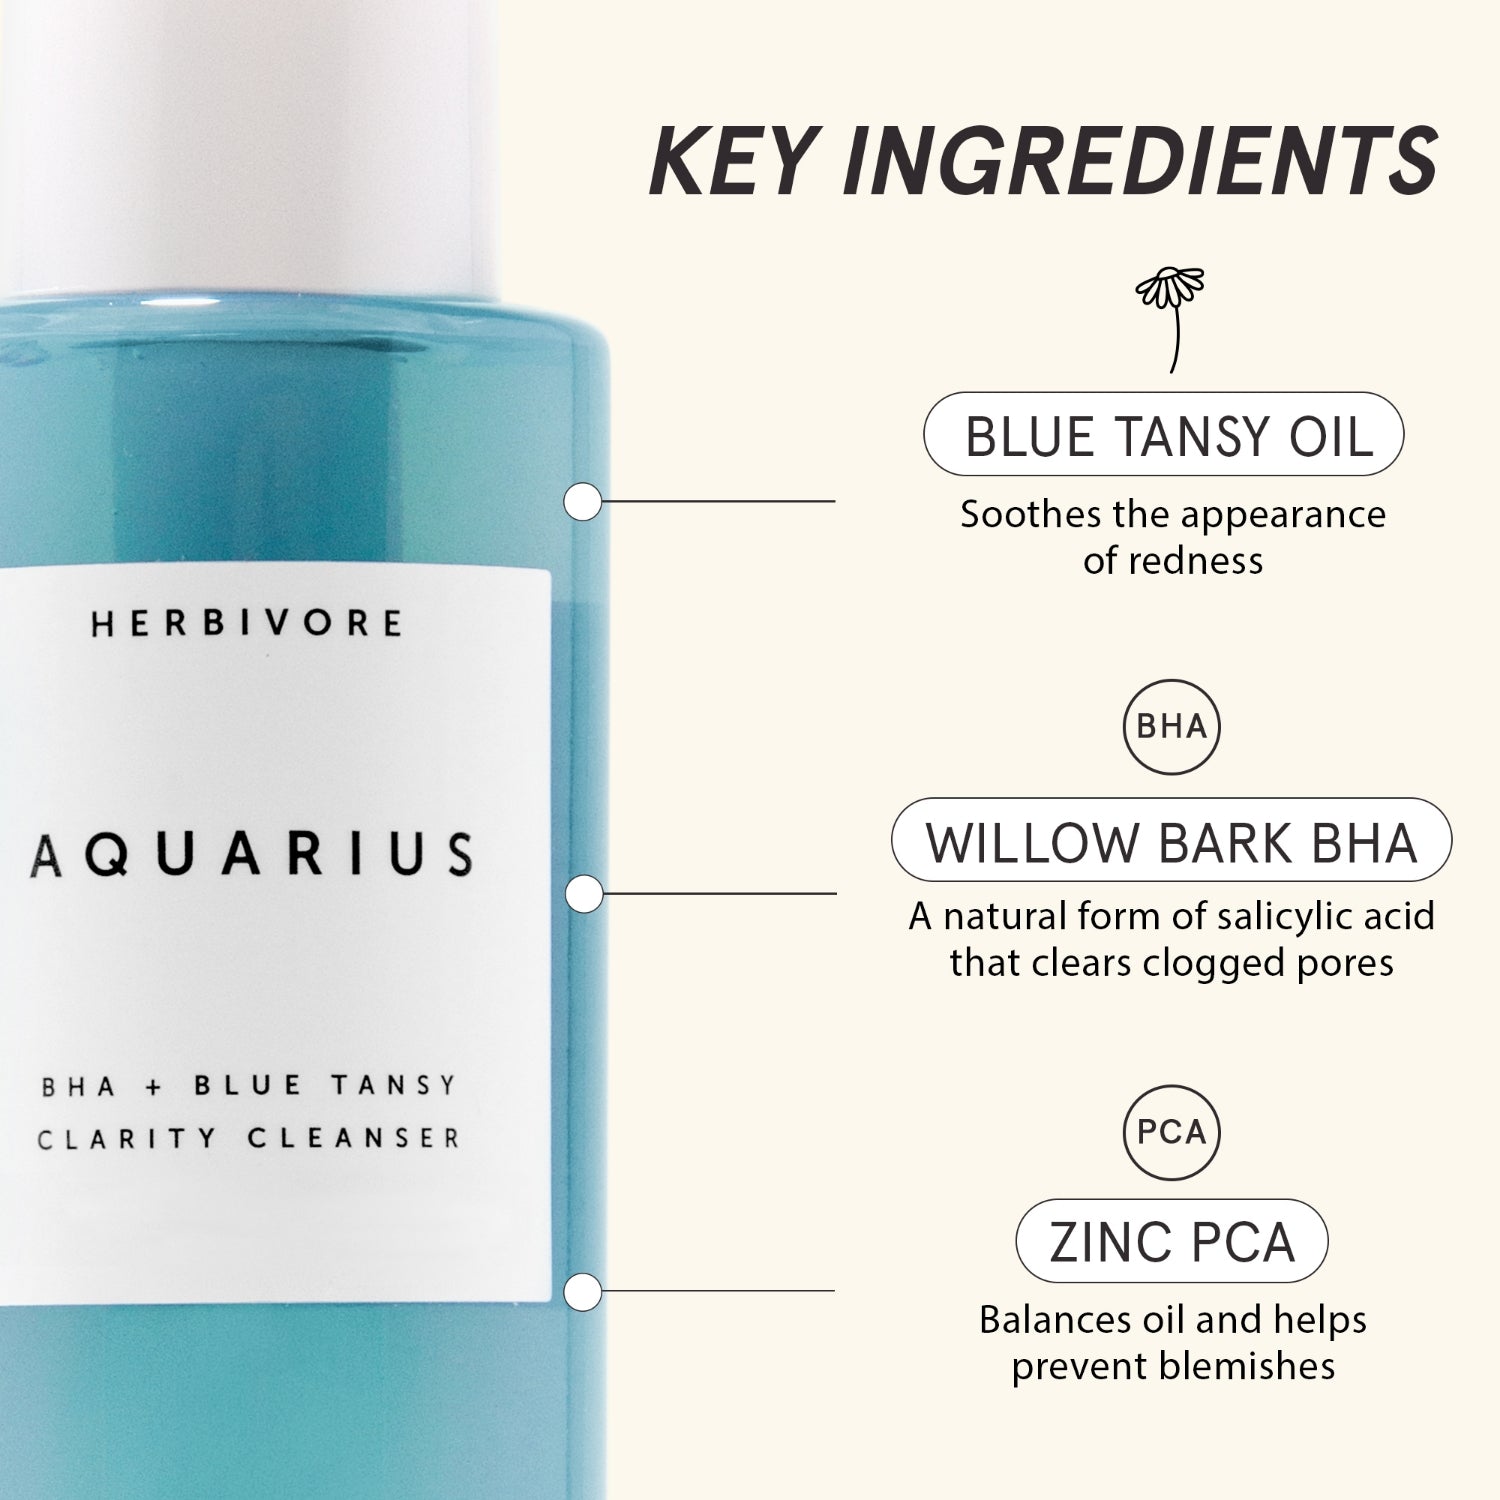 Close-up of Aquarius Cleanser next to list of 3 key ingredients | Blue Tansy Oil, Willow Bark BHA, and Zinc PCA